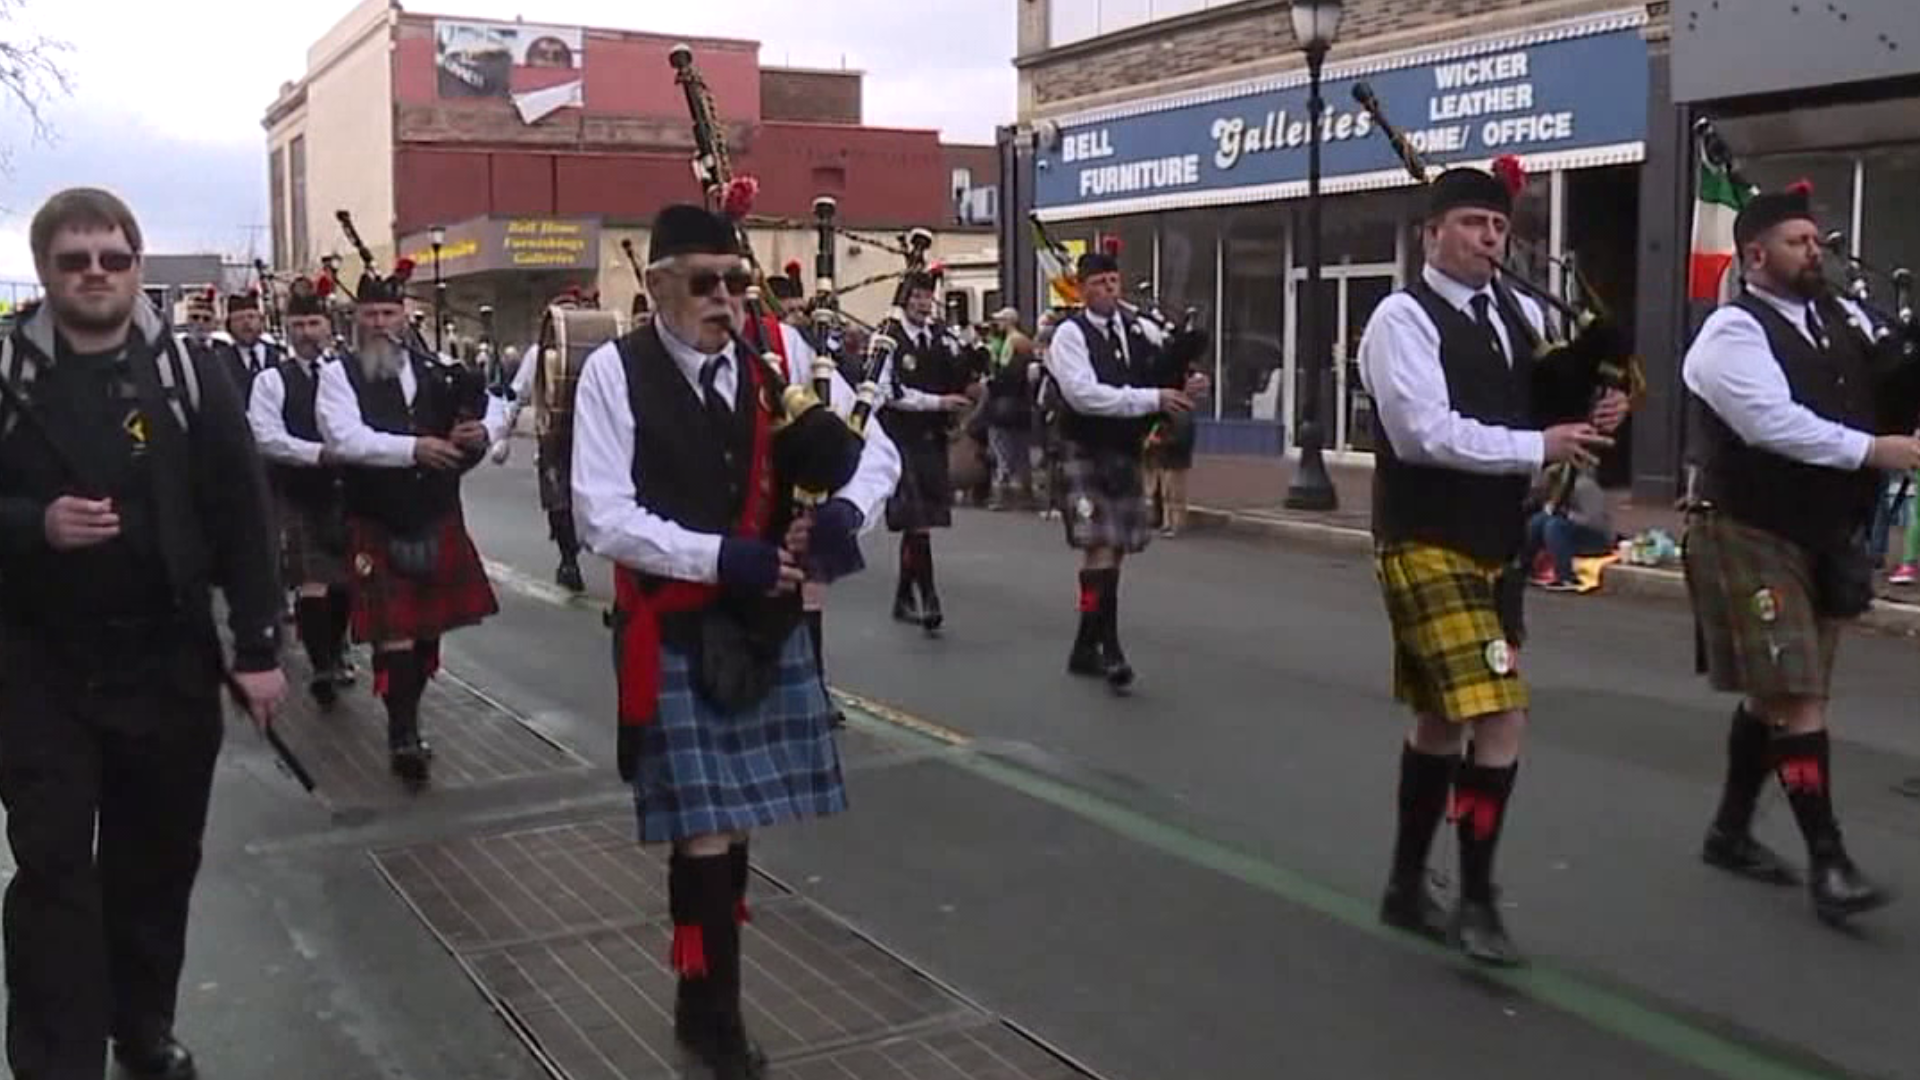 Both cities postponed their annual St. Patrick's Day celebrations in March because of COVID-19.